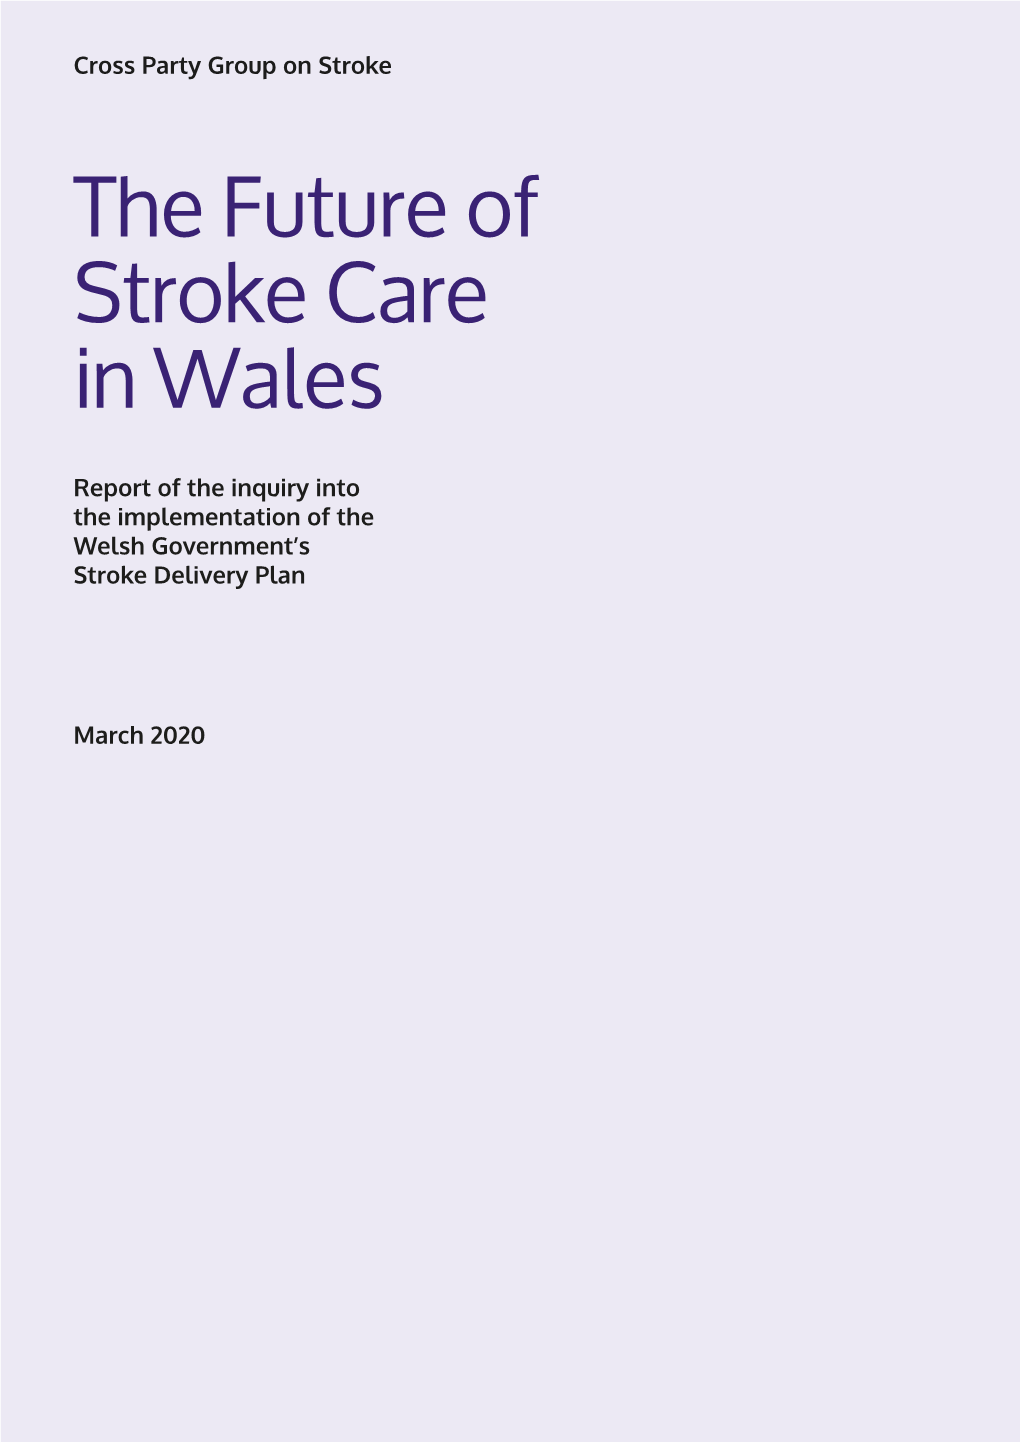 The Future of Stroke Care in Wales Report of the Inquiry Into the Implementation of the Welsh Government’S Stroke Delivery Plan